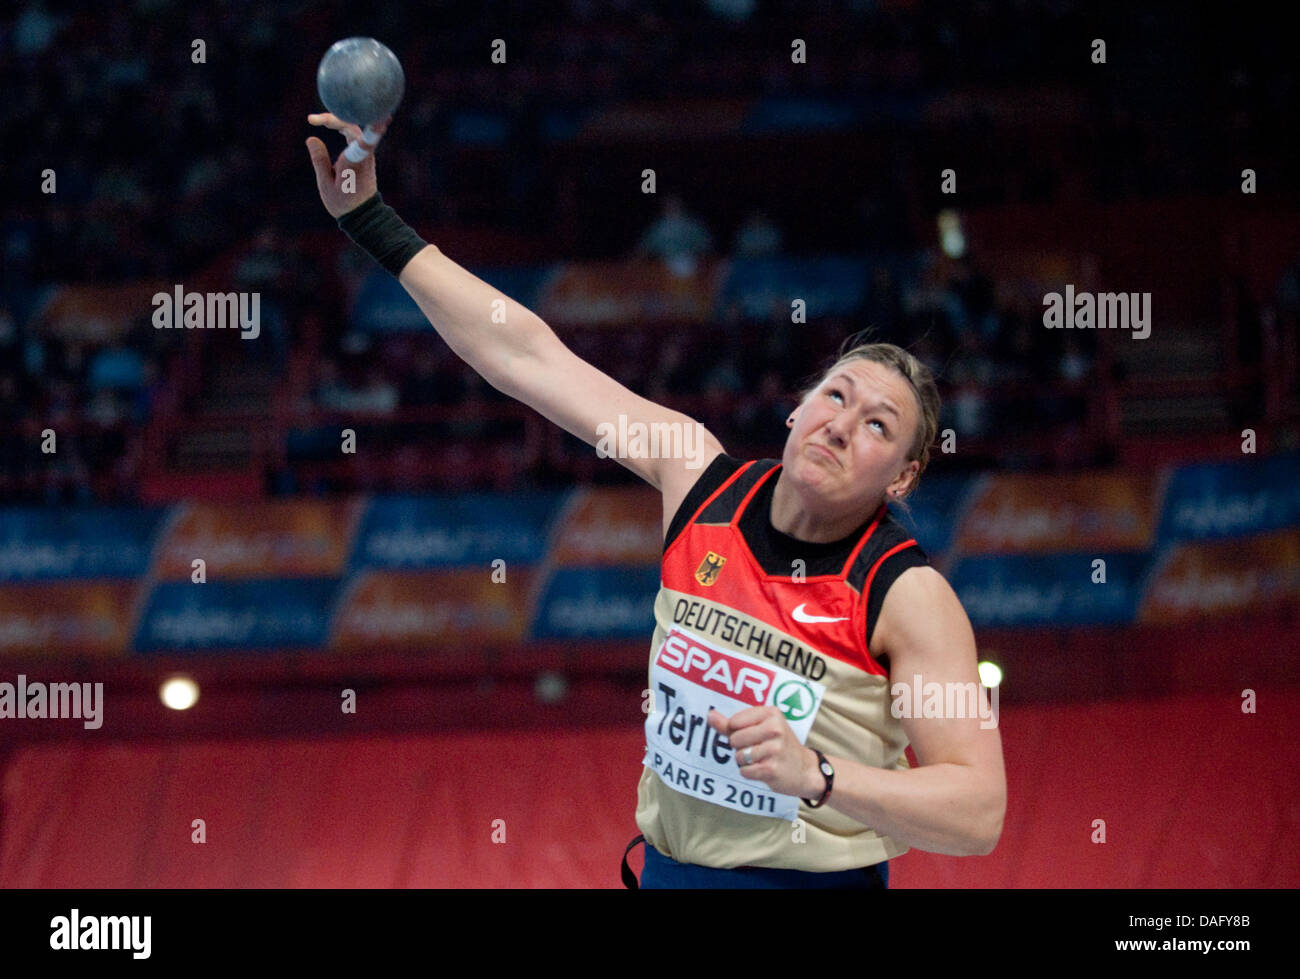 German athlete Josephine Terlecki is pictured during the women's shot put finals at the European Athletics Indoor Championships at the Palais Omnisports in Paris, France, 05 March 2011. Terlecki took third place. Photo: Bernd Thissen Stock Photo